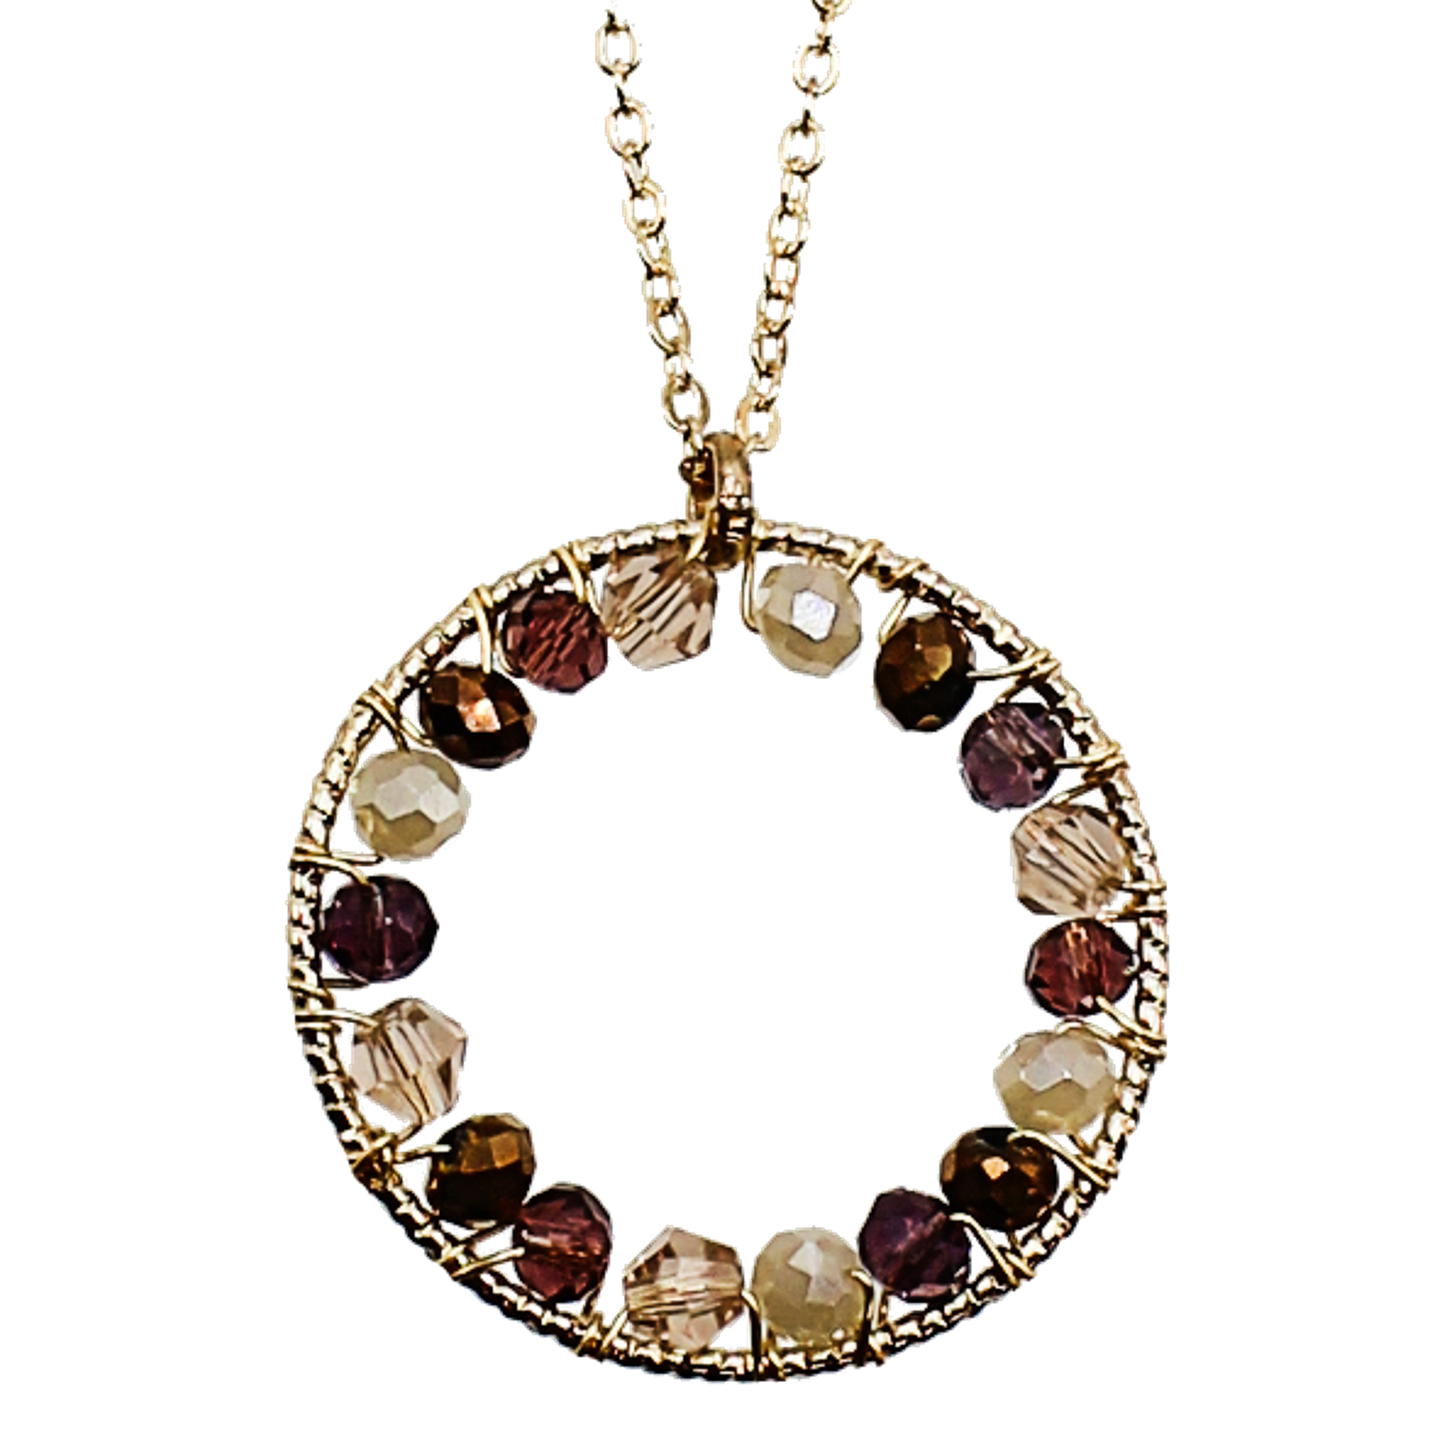 18k Gold Pinwheel Necklace has a beaded design around the frame using wire and beads in the gold and brown color family.